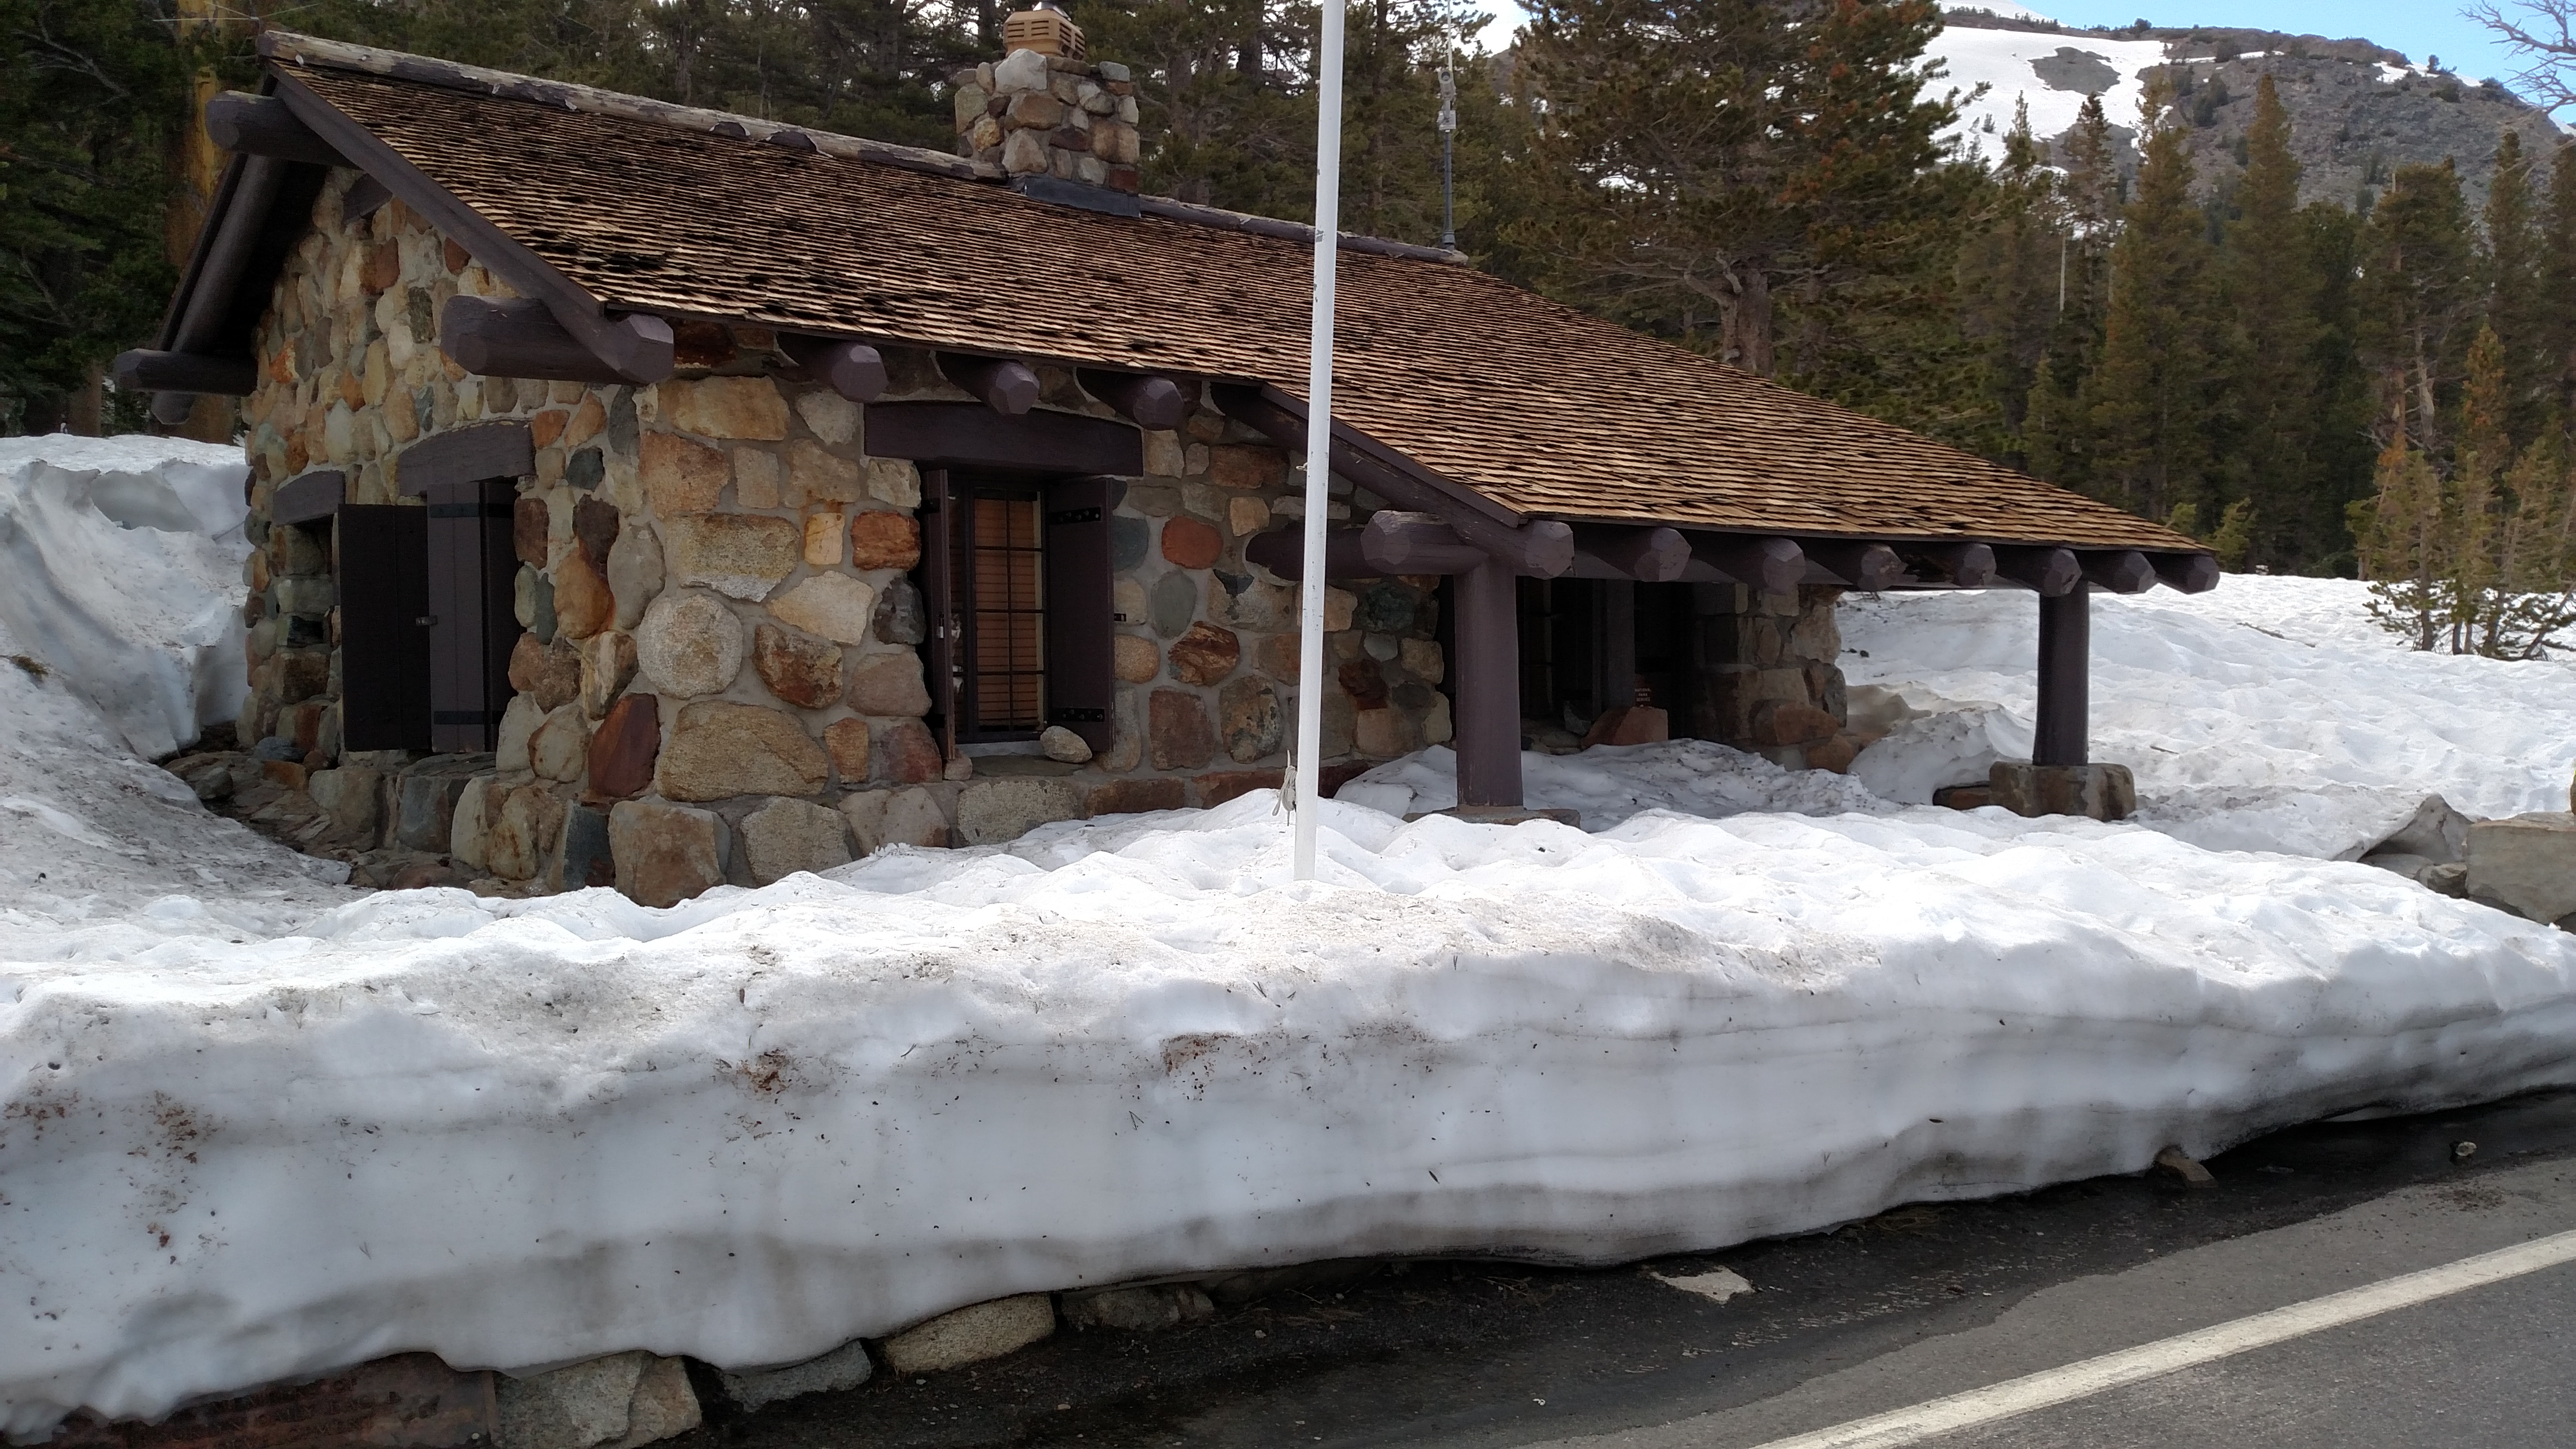 Several feet of snow still surround the entrance station building.